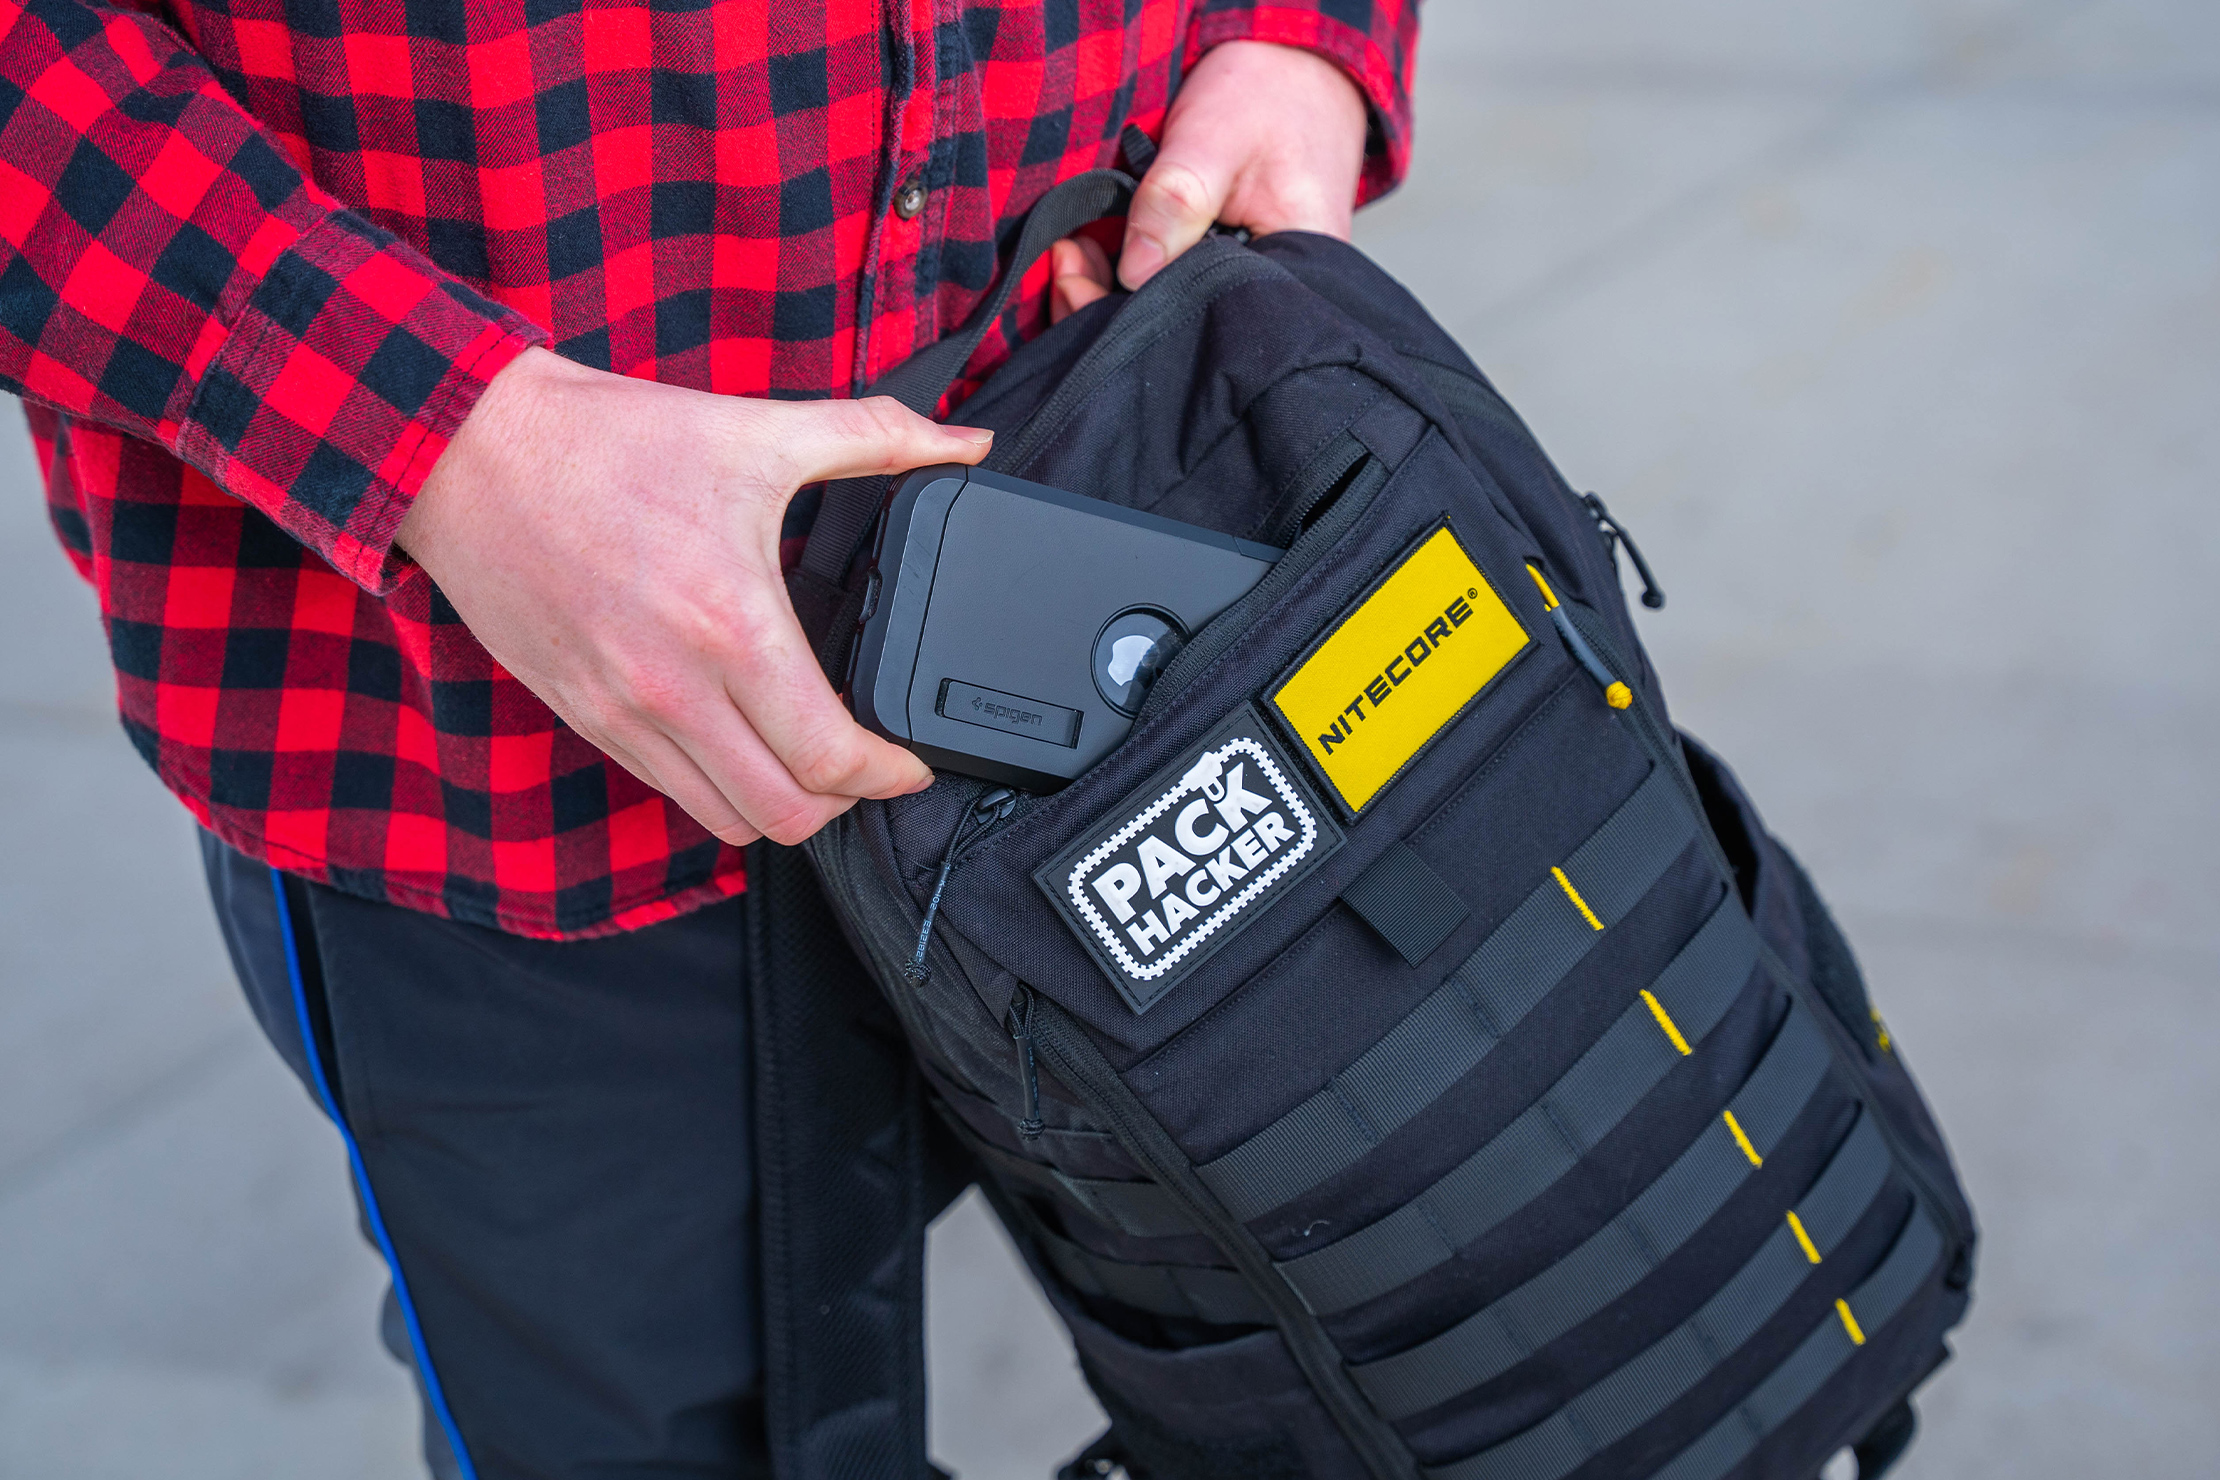 NITECORE BP18 Commuter Backpack In Use